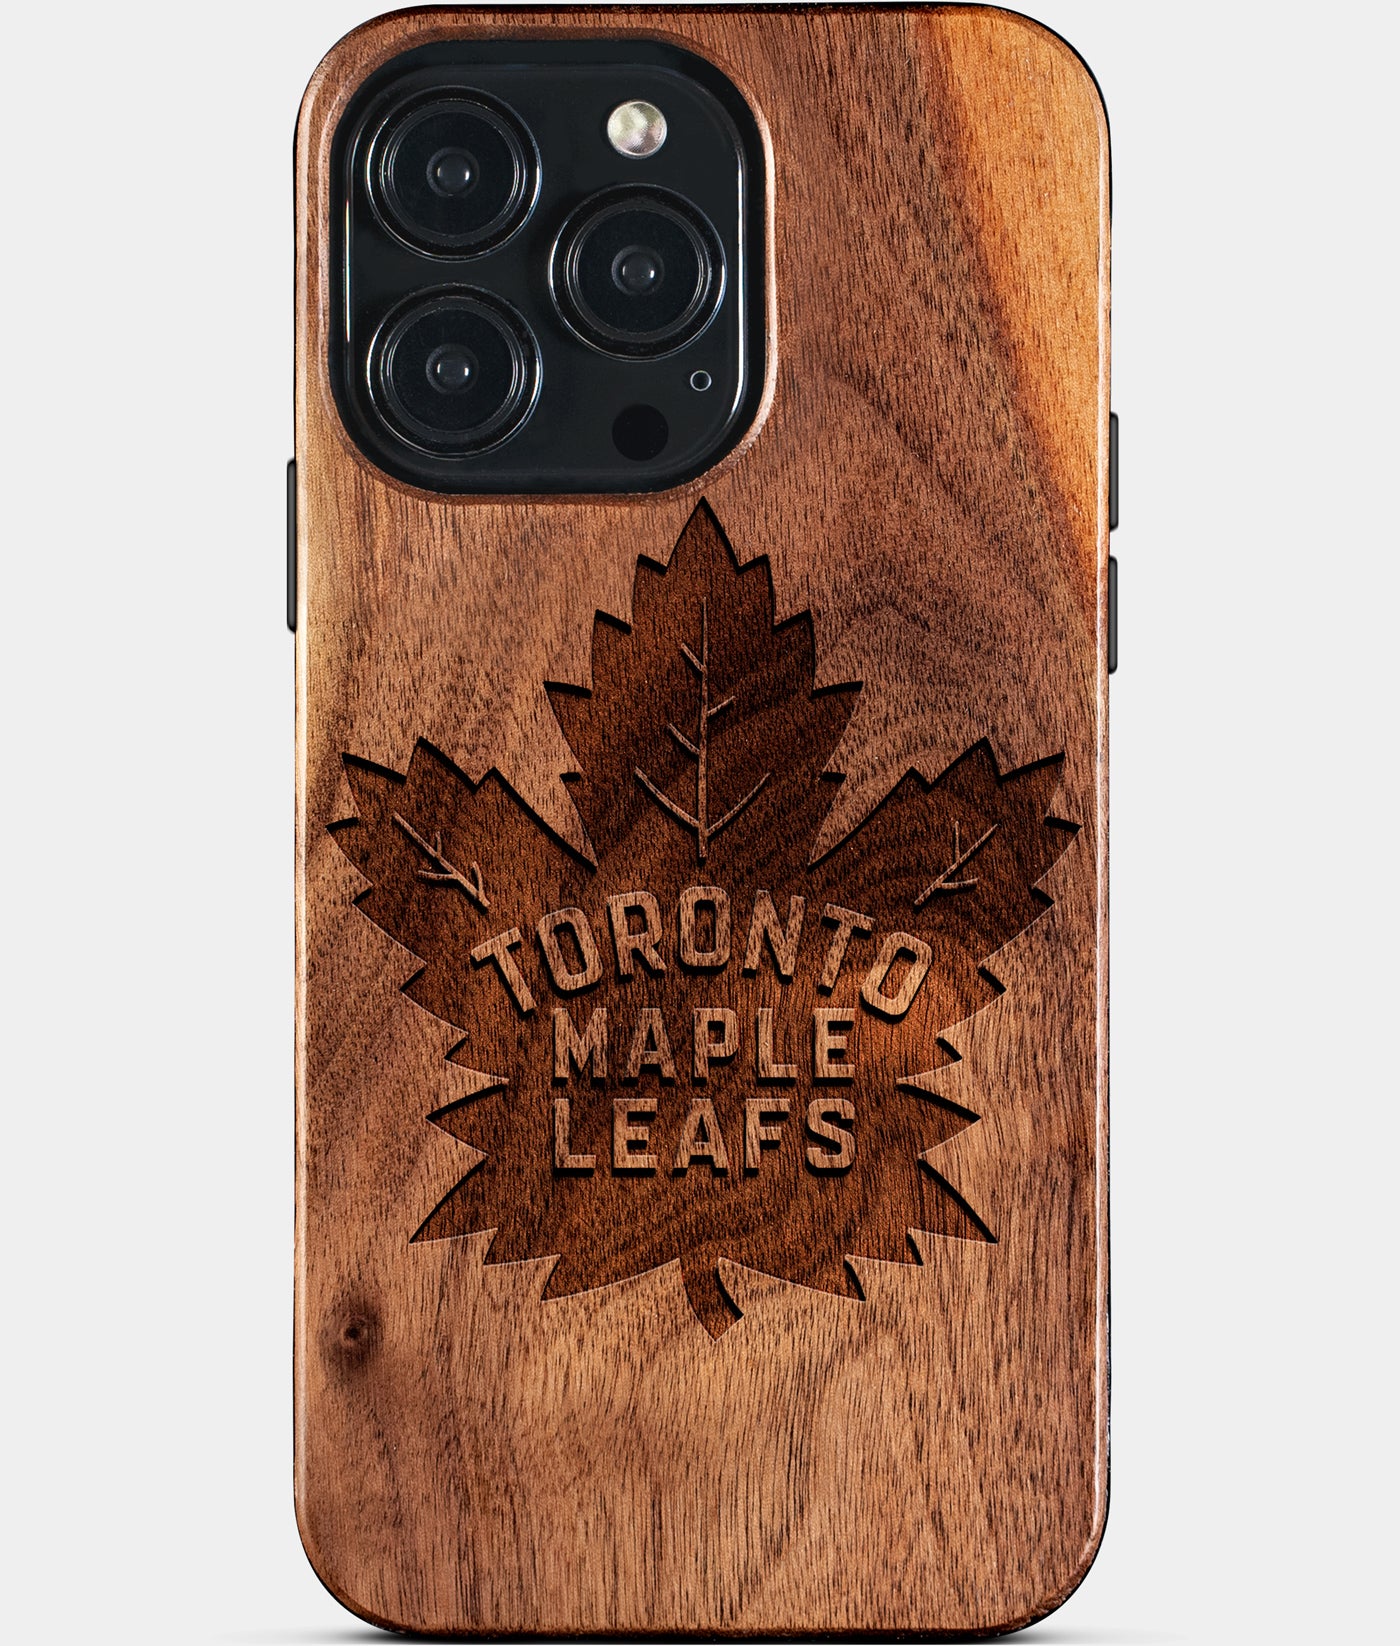 Toronto Maple Leafs iPhone Clear Ice Case